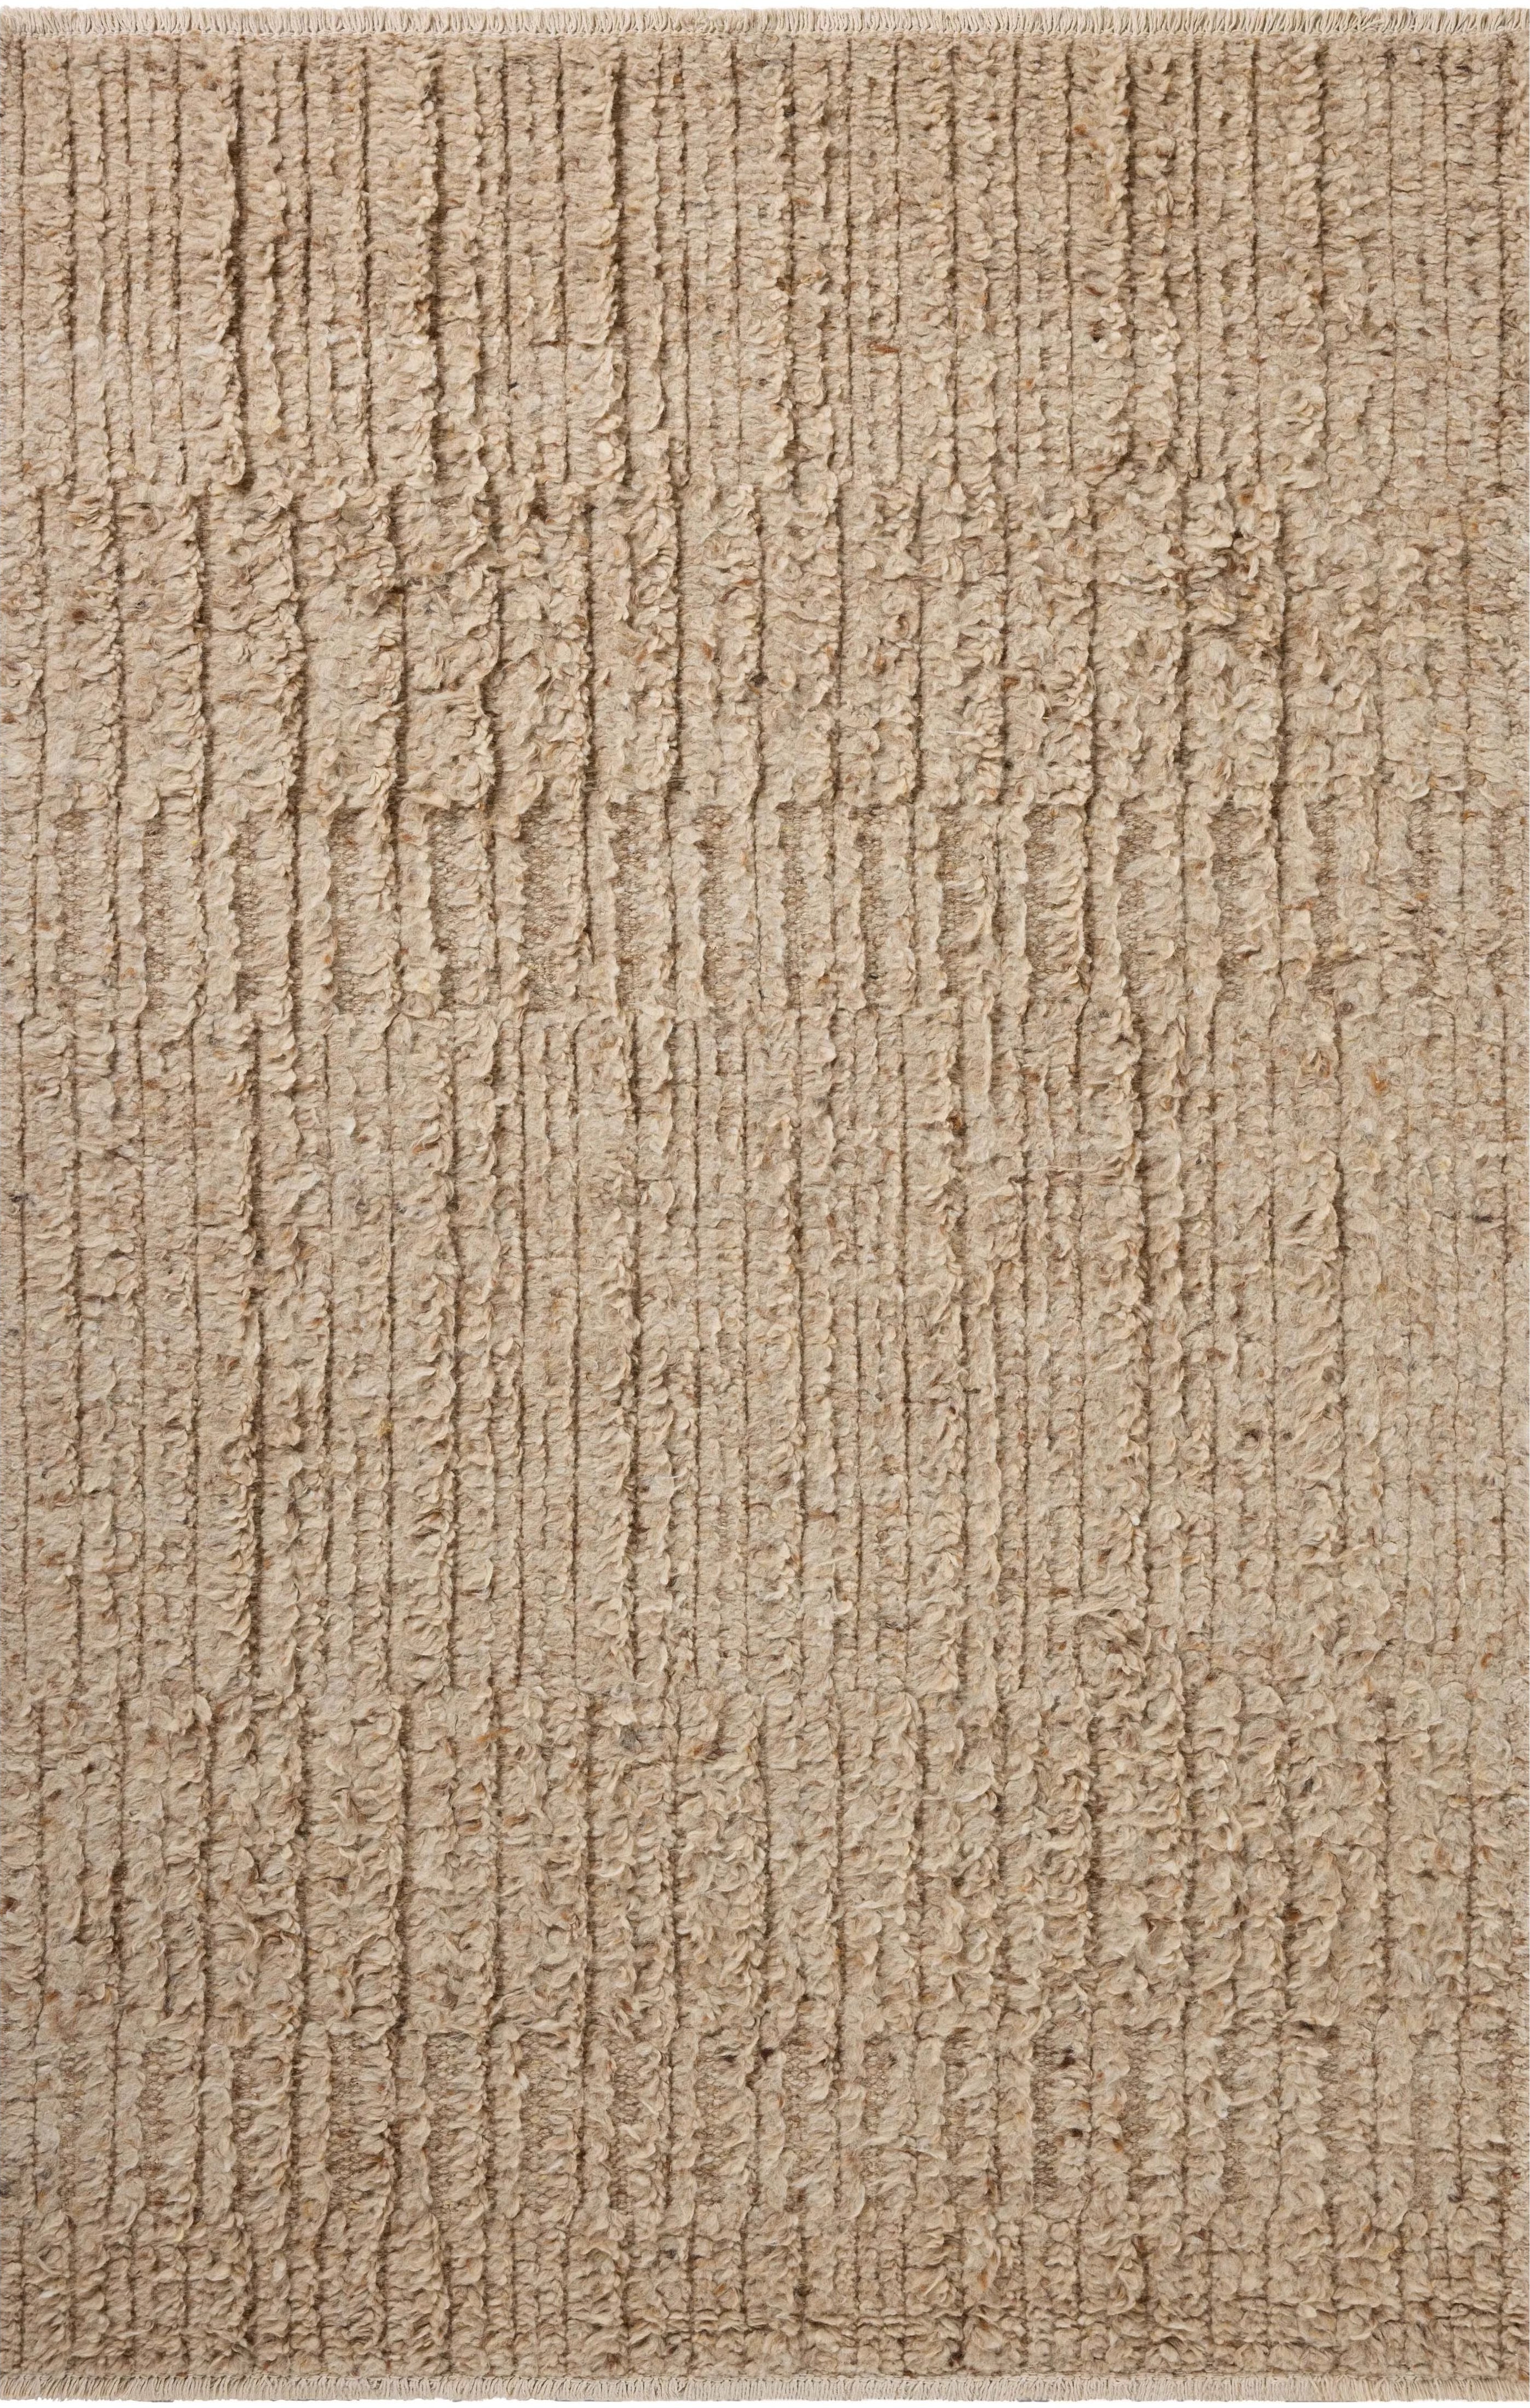 Irresistible to walk upon, the Dana Sand Rug by Brigette Romanek x Loloi has a high-low texture that alternates between a subtly shaggy pile and a soft base. Horizontal broken stripes give the area rug a fresh and energized structure, while a finish of fringe along the edges accentuates its sense of movement. Amethyst Home provides interior design, new home construction design consulting, vintage area rugs, and lighting in the Portland metro area.